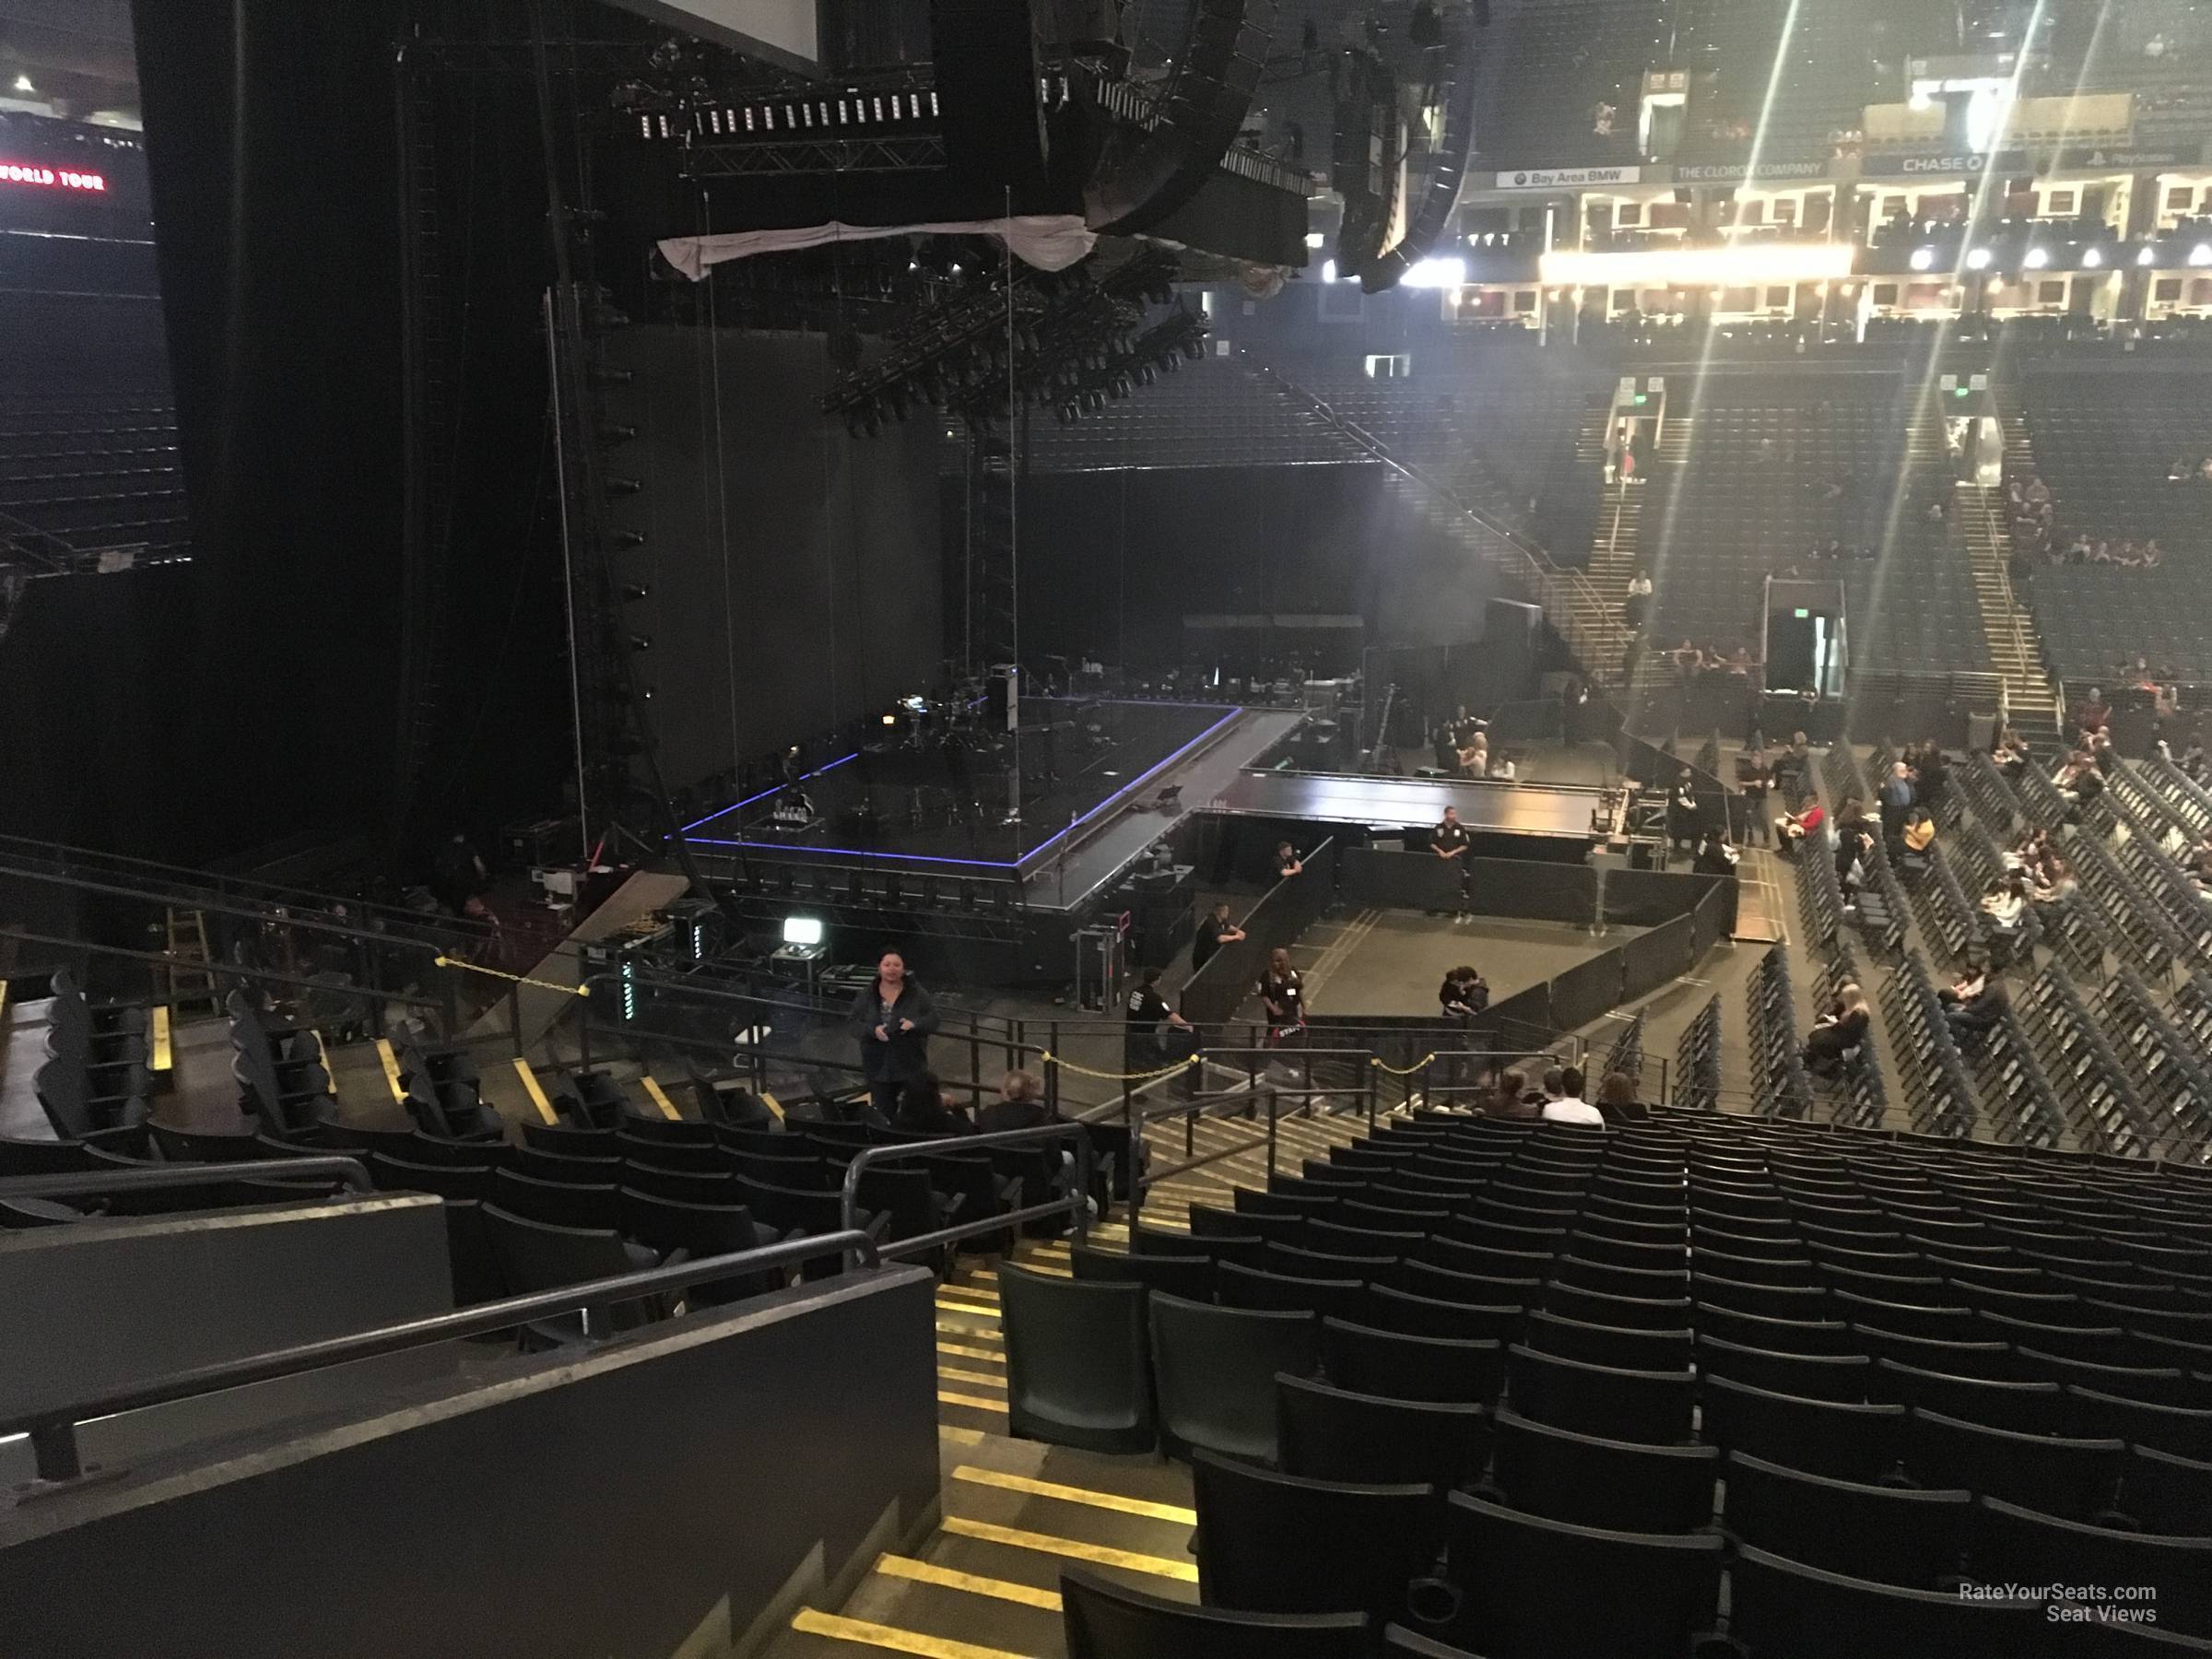 section 116, row 22 seat view  - oakland arena